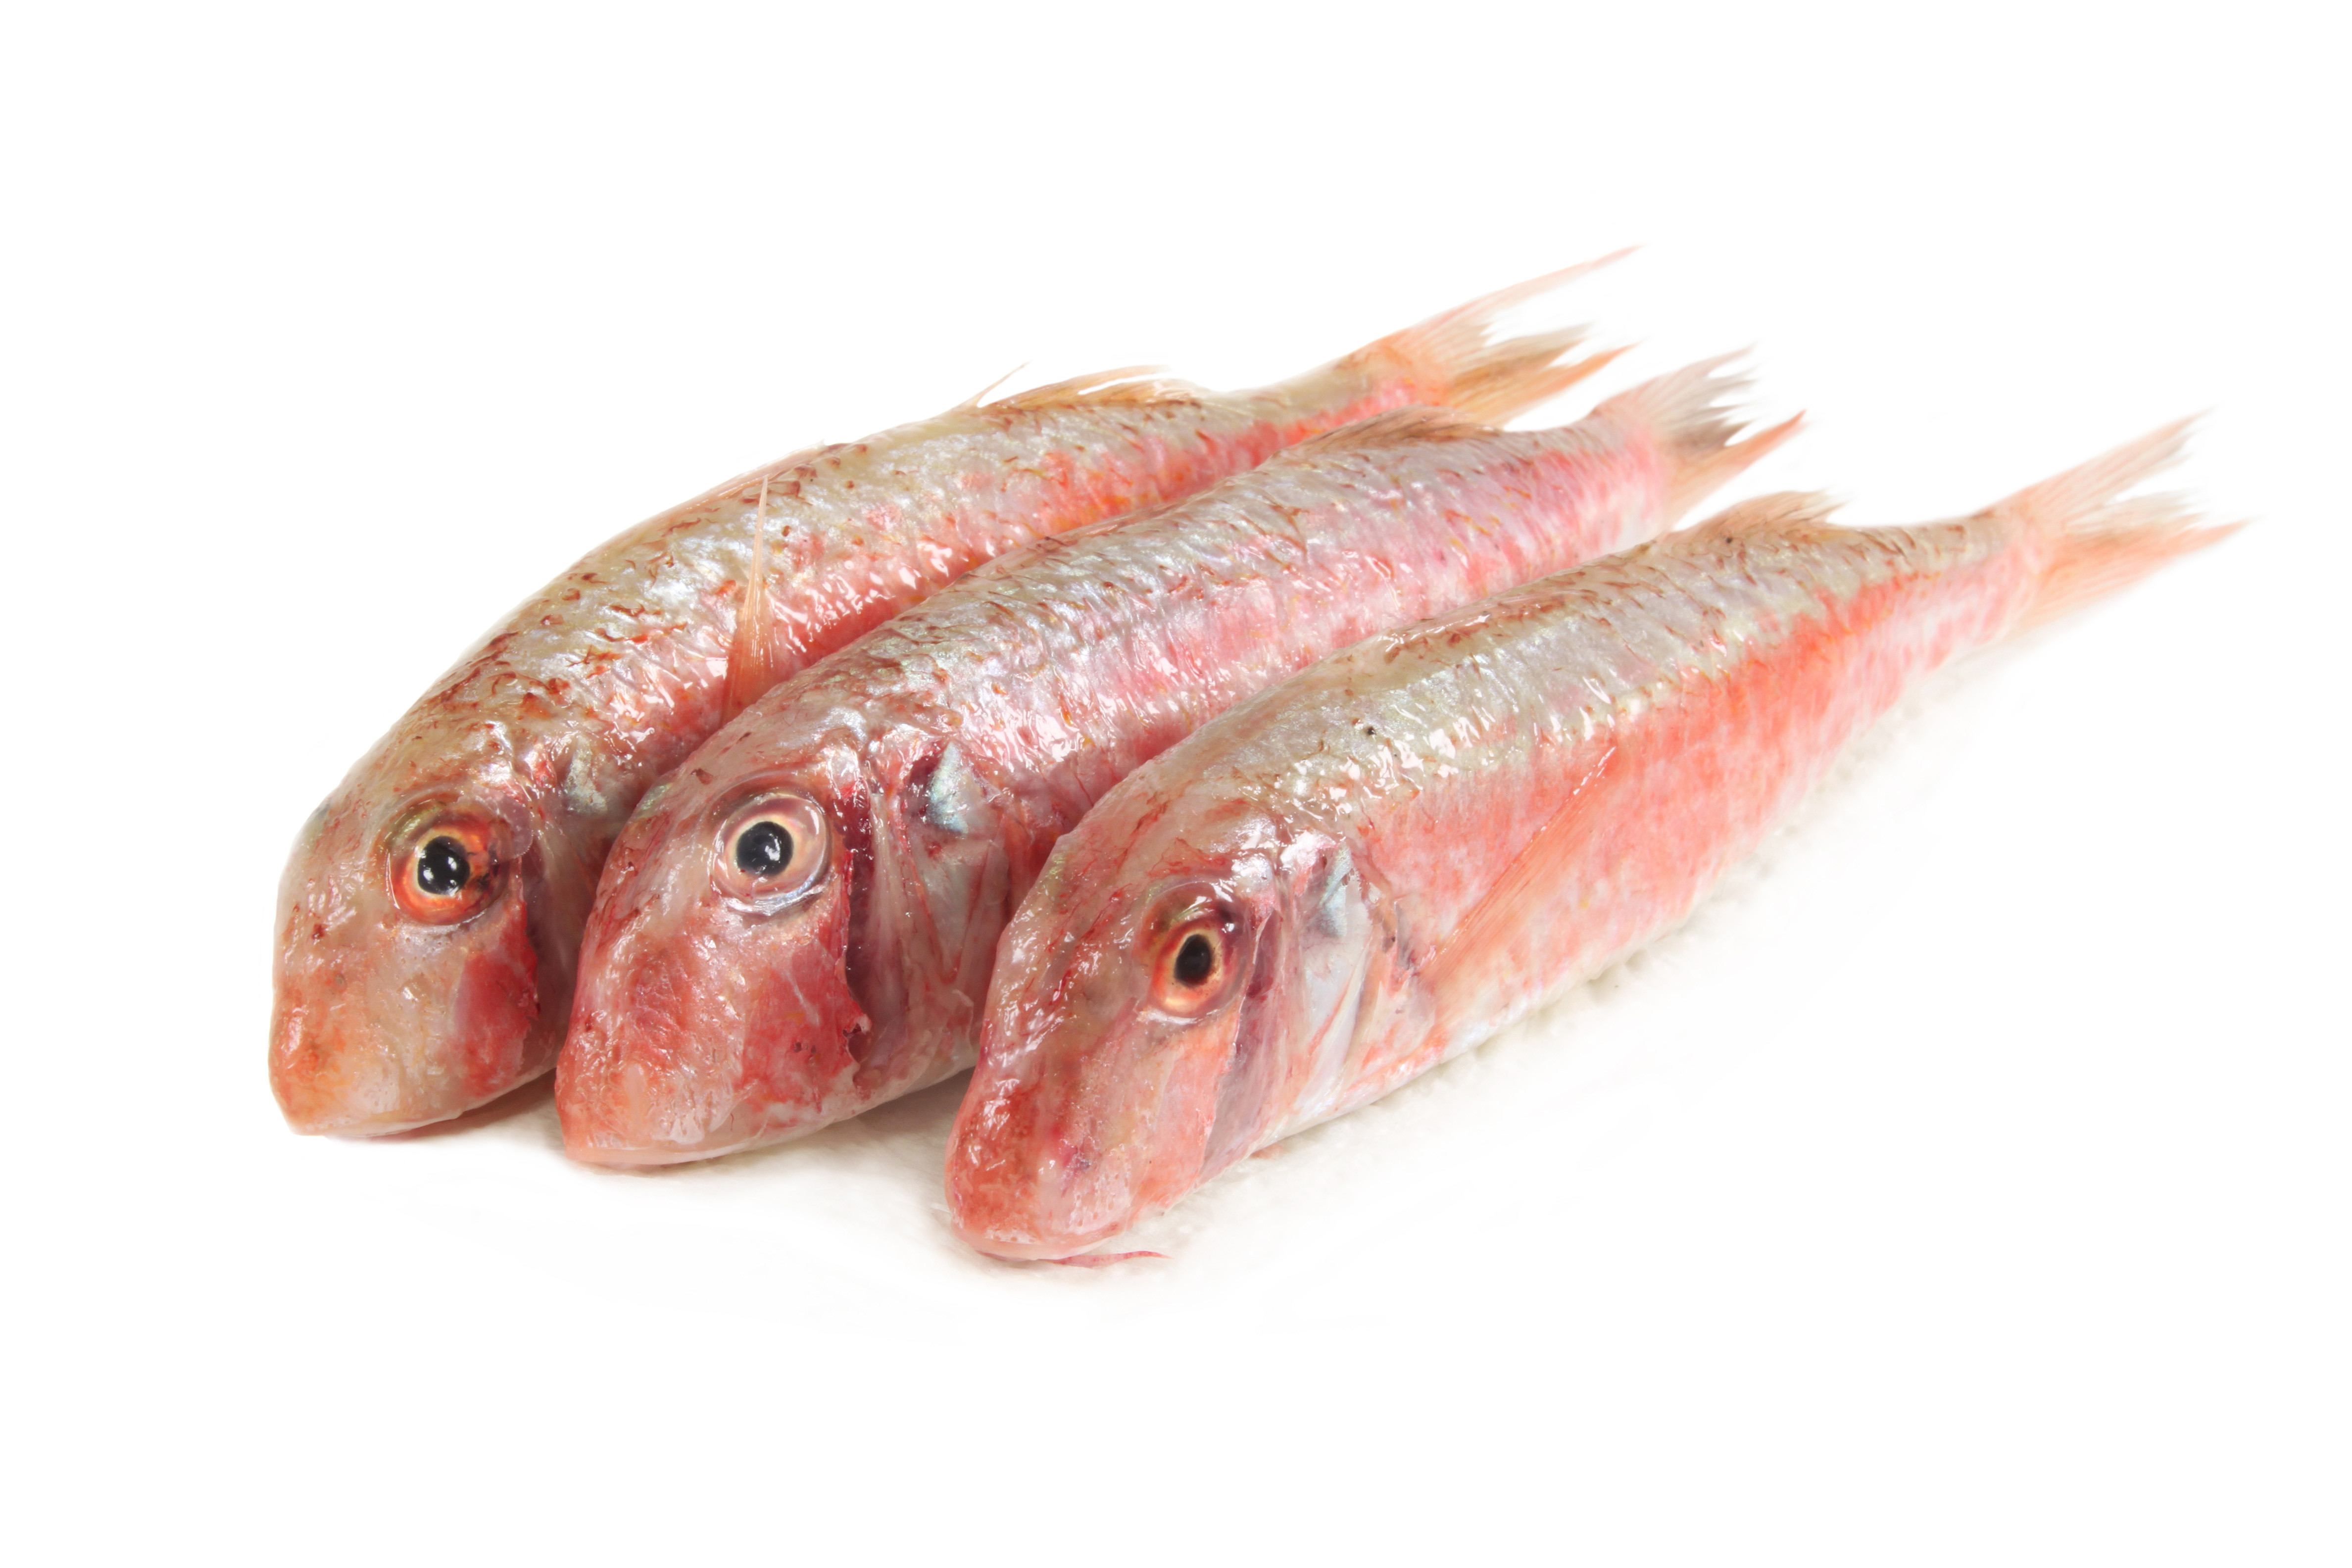 Frozen red mullet from Morocco export import company